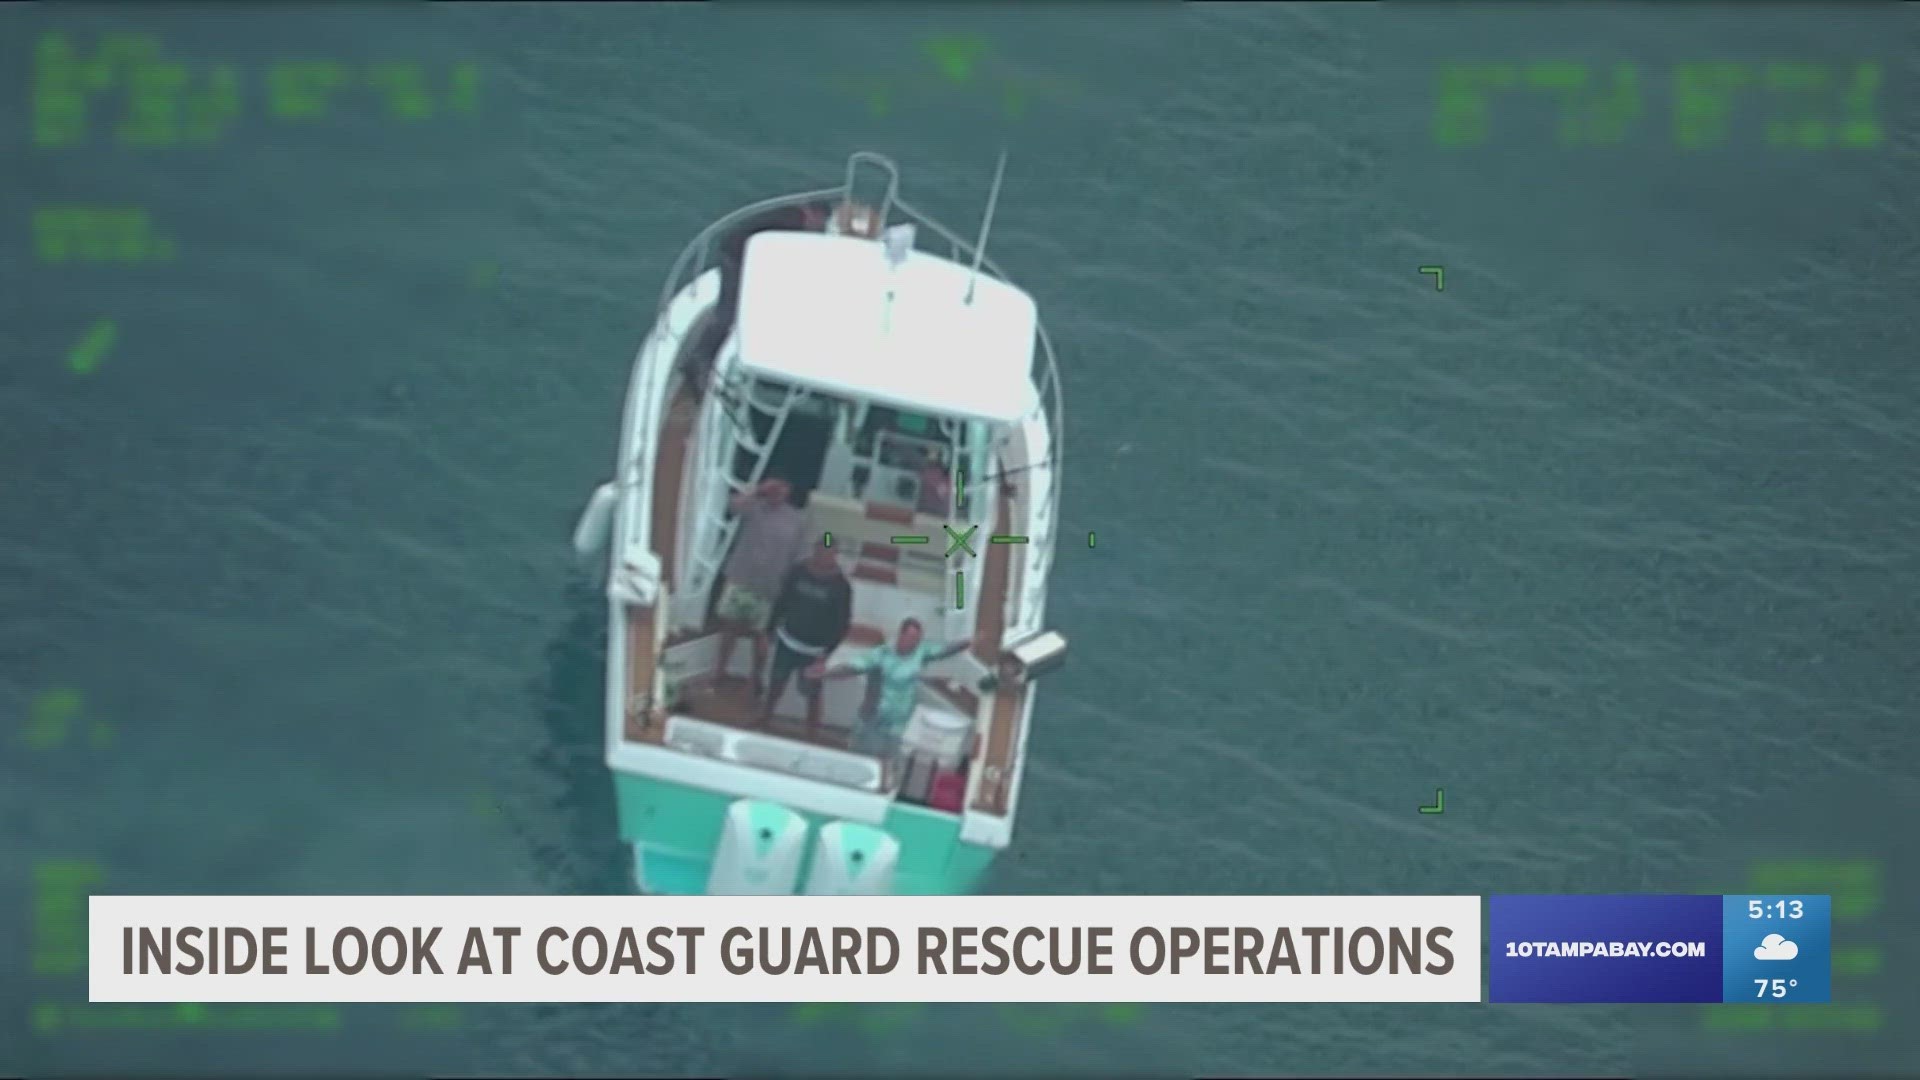 10 Tampa Bay got a behind-the-scenes look at how USCG operates search and rescue missions, starting inside their dispatch center at the base in St. Pete.